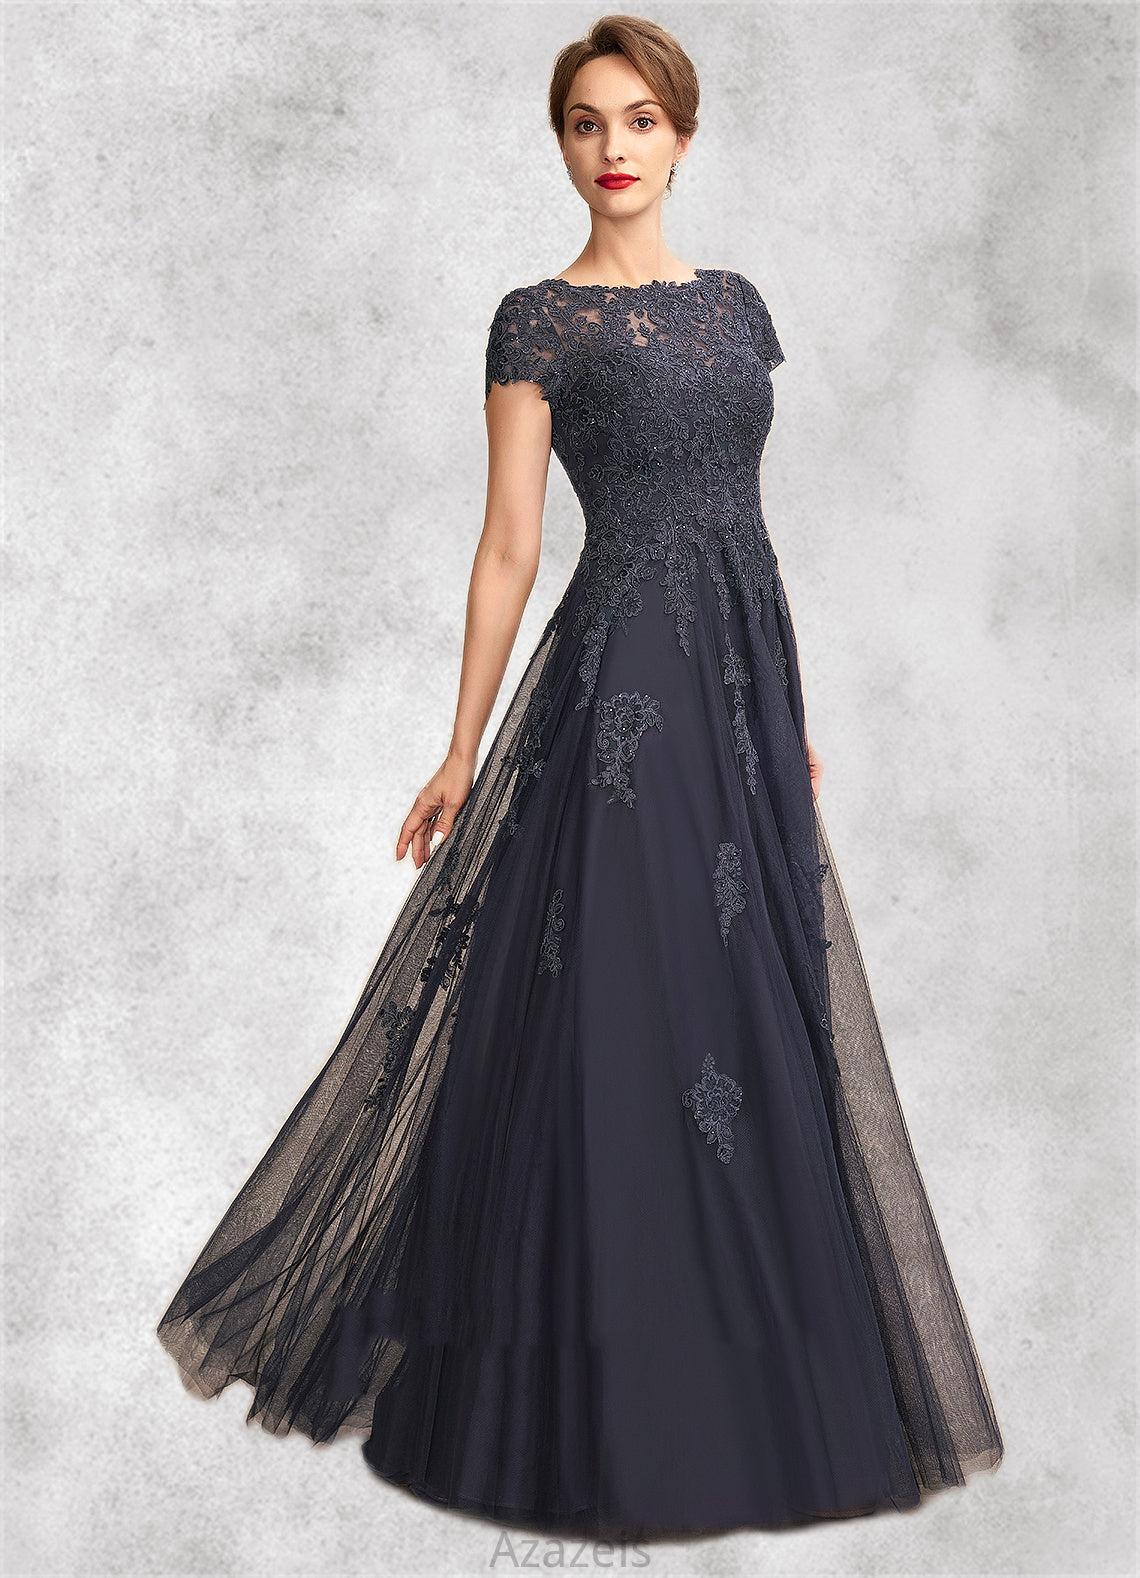 Sally A-Line Scoop Neck Floor-Length Tulle Lace Mother of the Bride Dress With Beading DF126P0015029